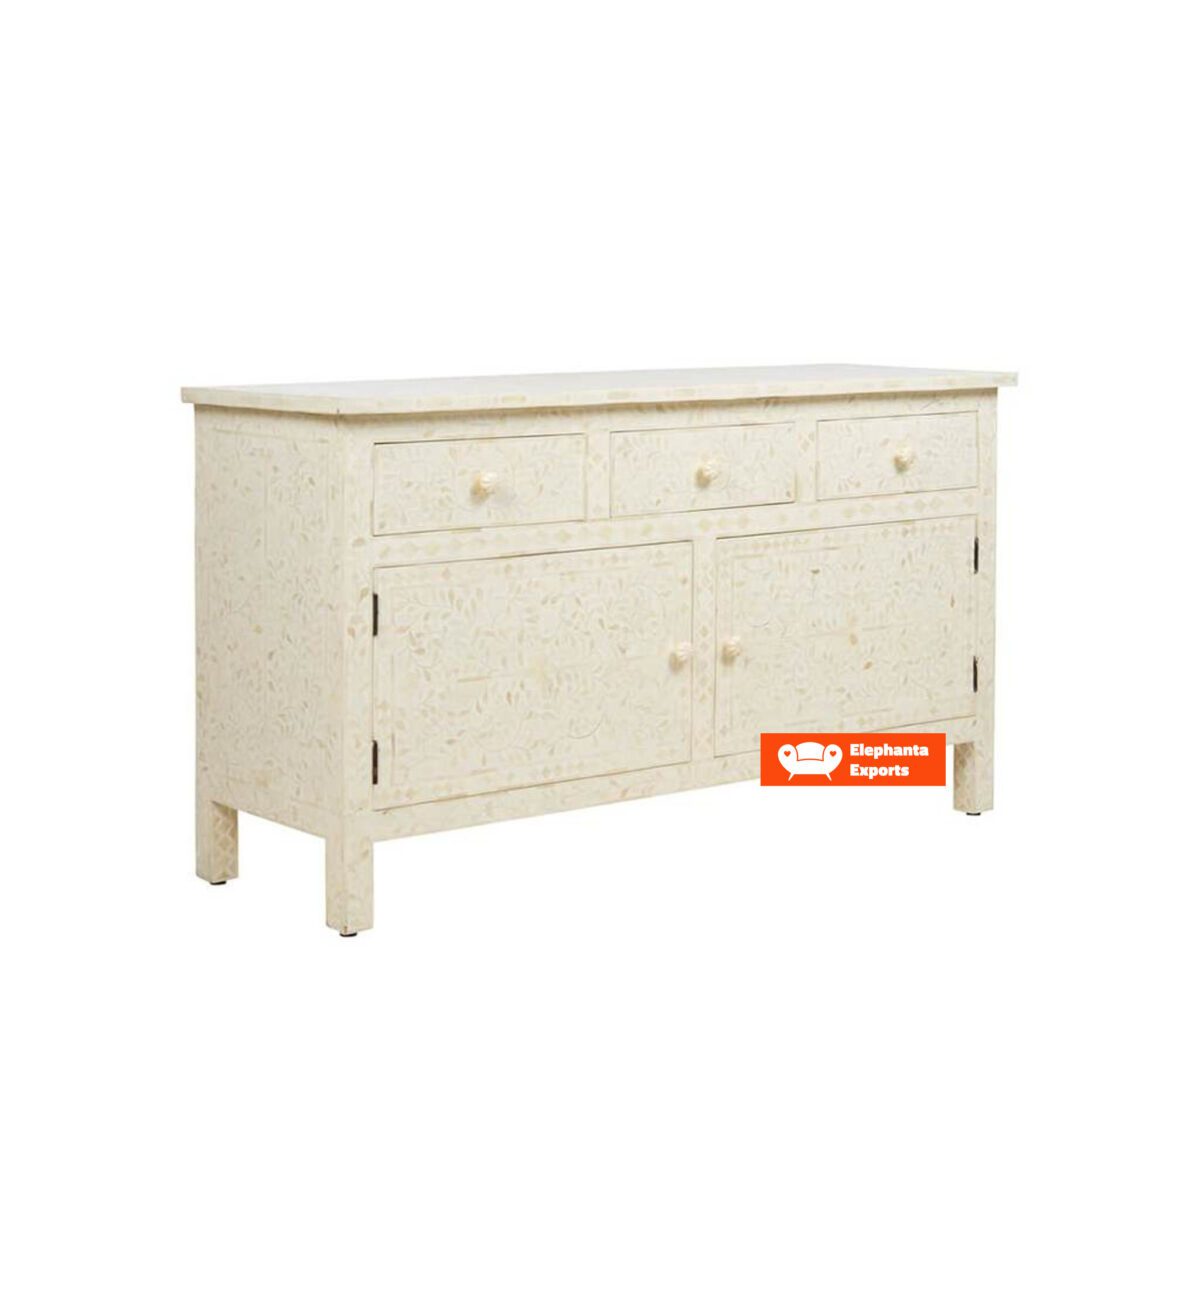 Floral Bone Inlay 3 Drawers and 2 Door Side Board in White